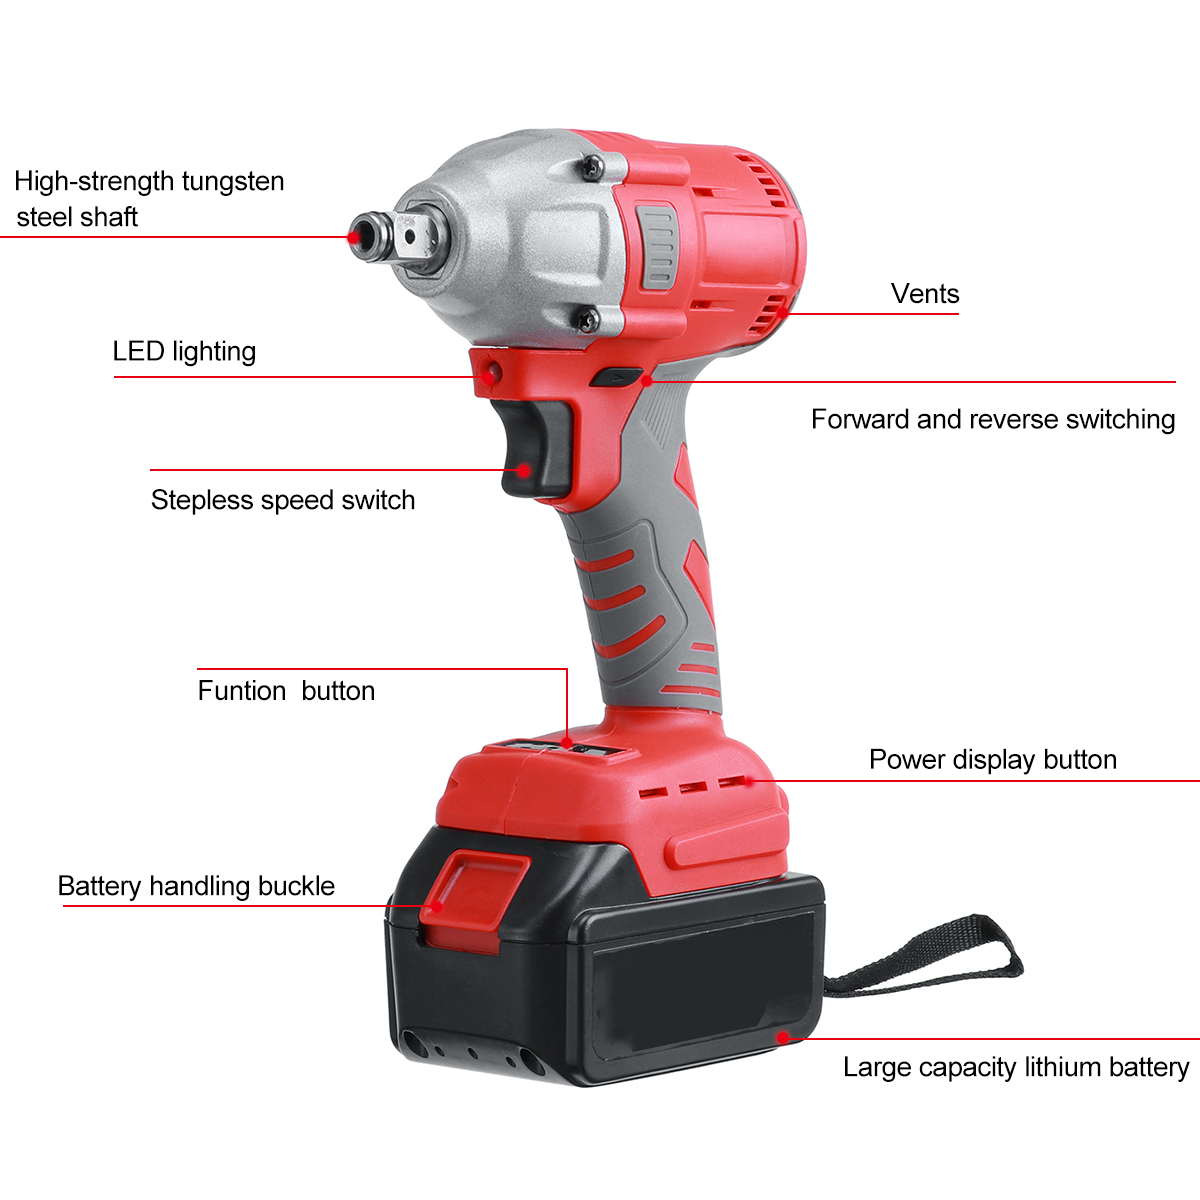 588VF-Brushless-Electric-Torque-Wrench-Cordless-2-In-1-Screwdriver-Impact-Wrench-Adapted-To-Makita-B-1843519-8